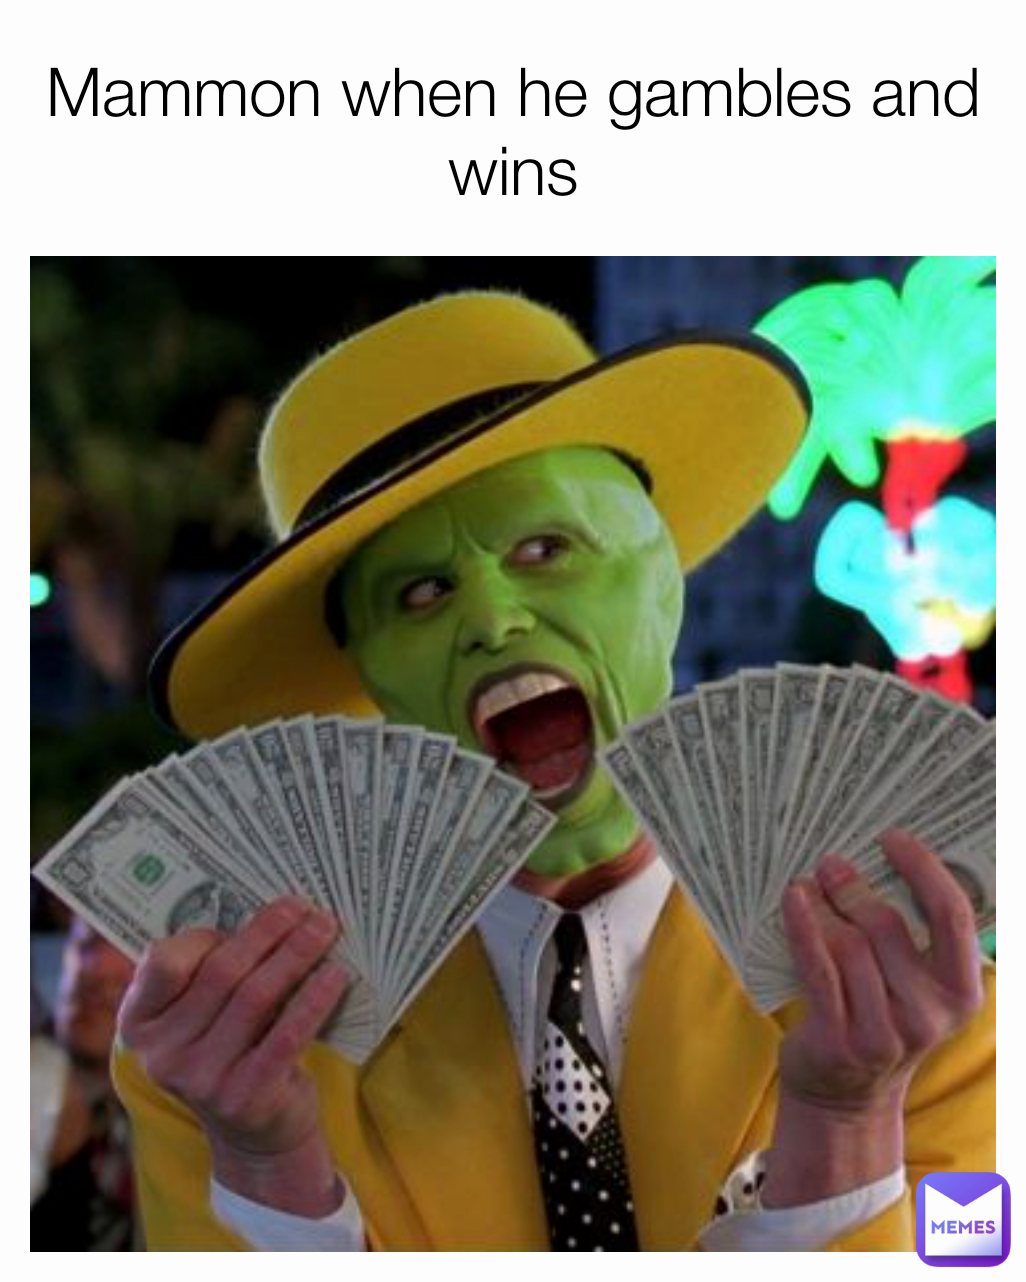 Mammon when he gambles and wins